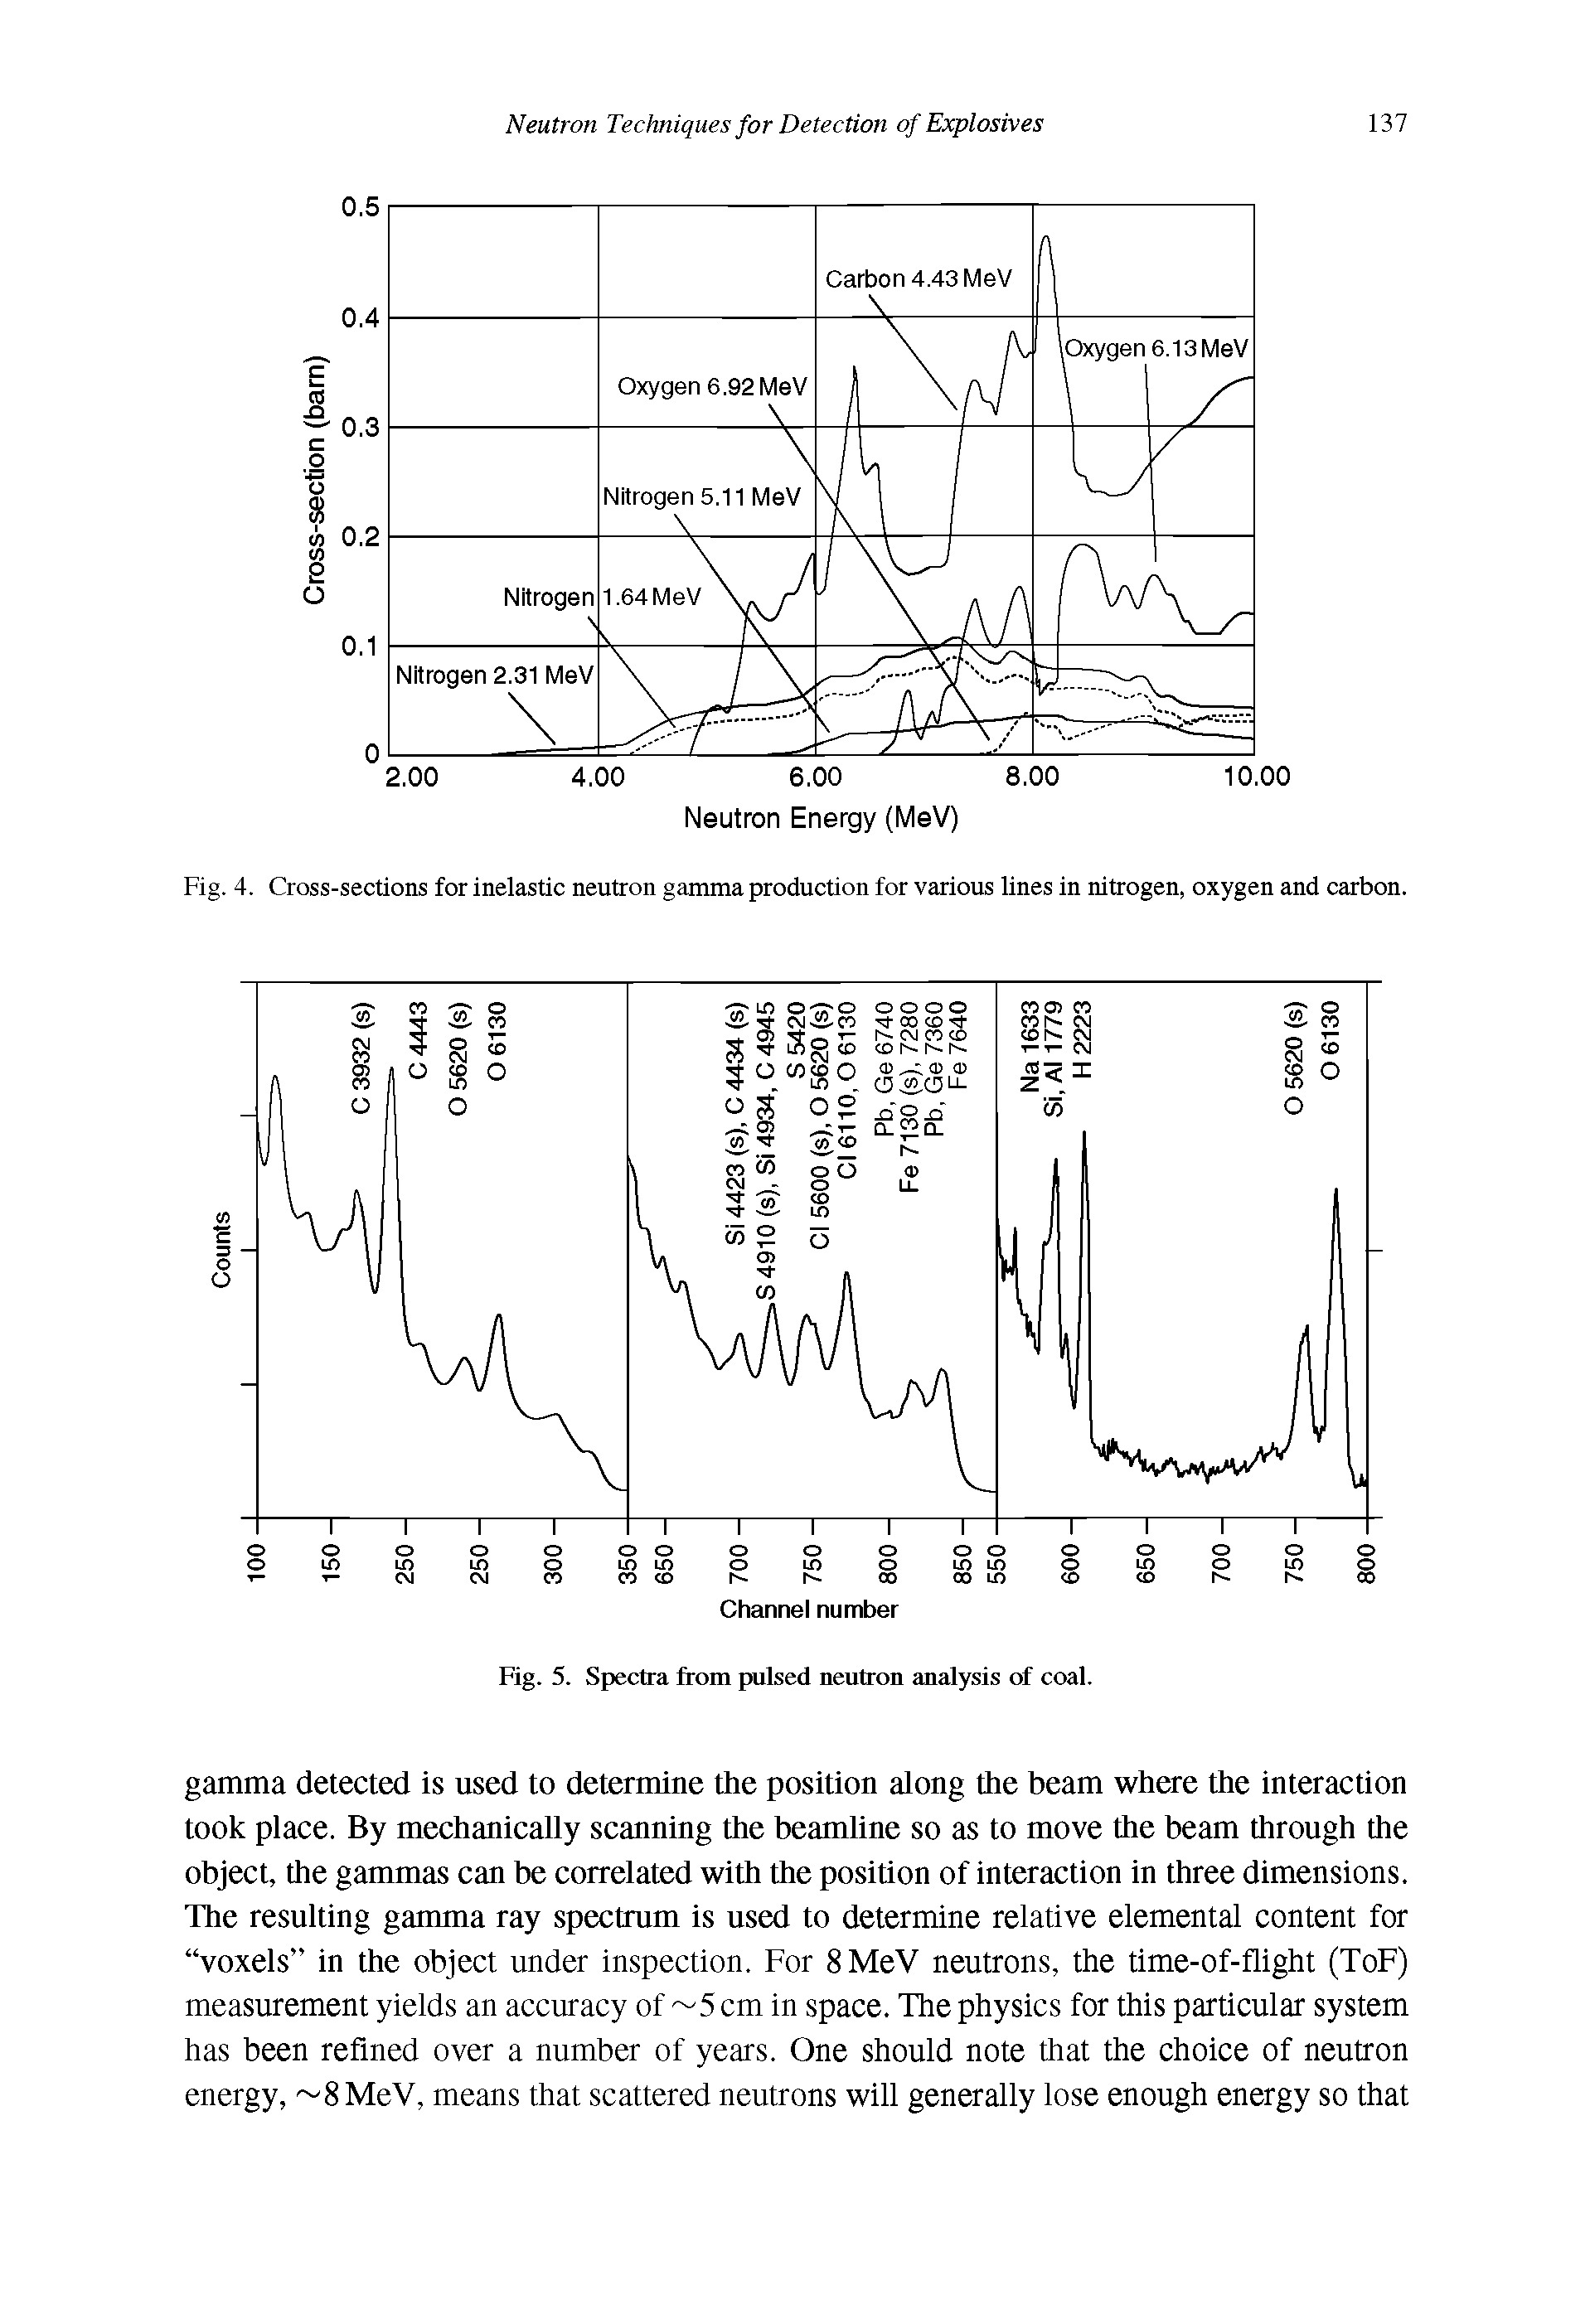 Fig. 5. Spectra from pulsed neutron analysis of coal.